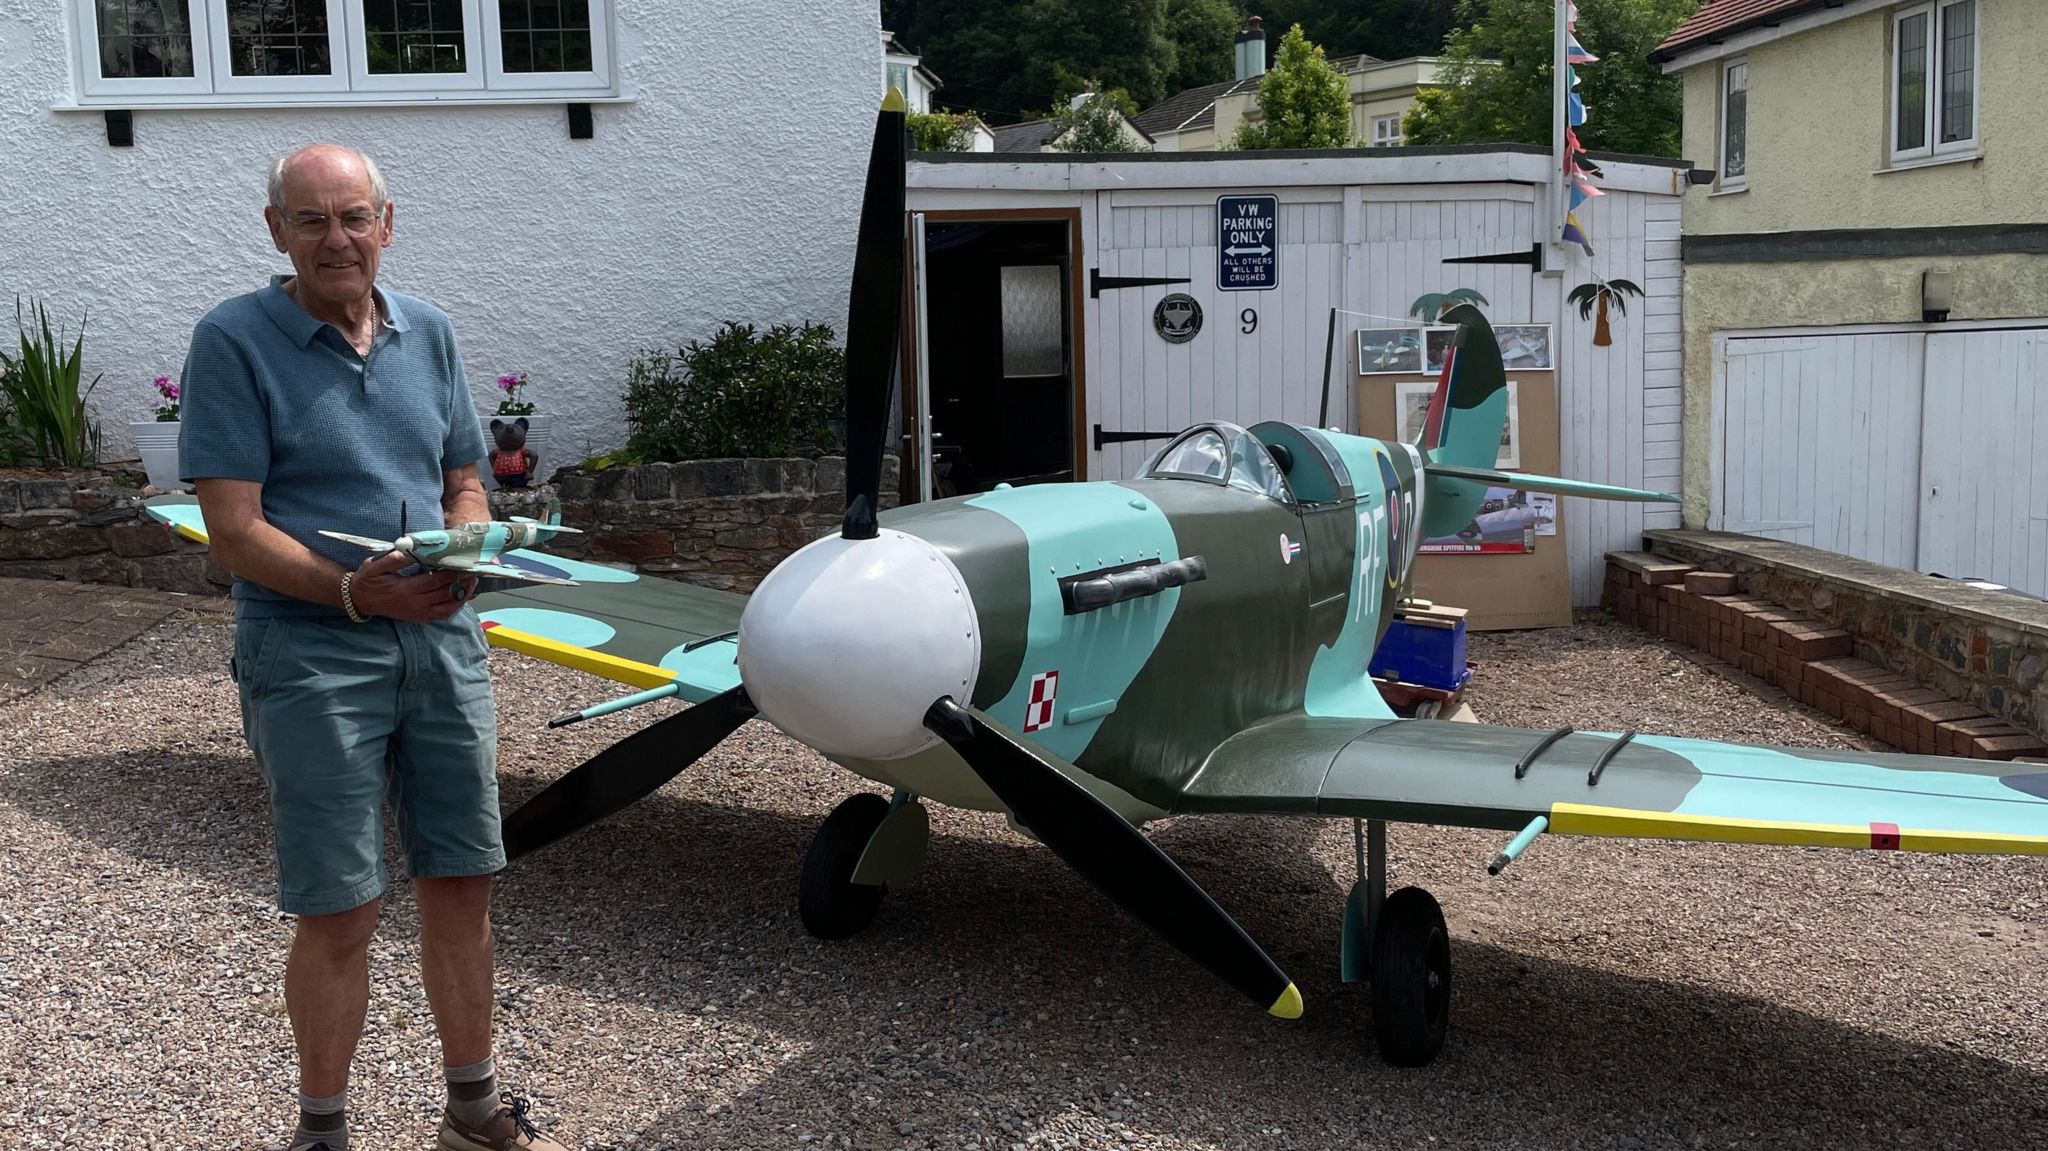 A man stands beside an almost full scale Spitfire aeroplane holding a 3/4 scale model